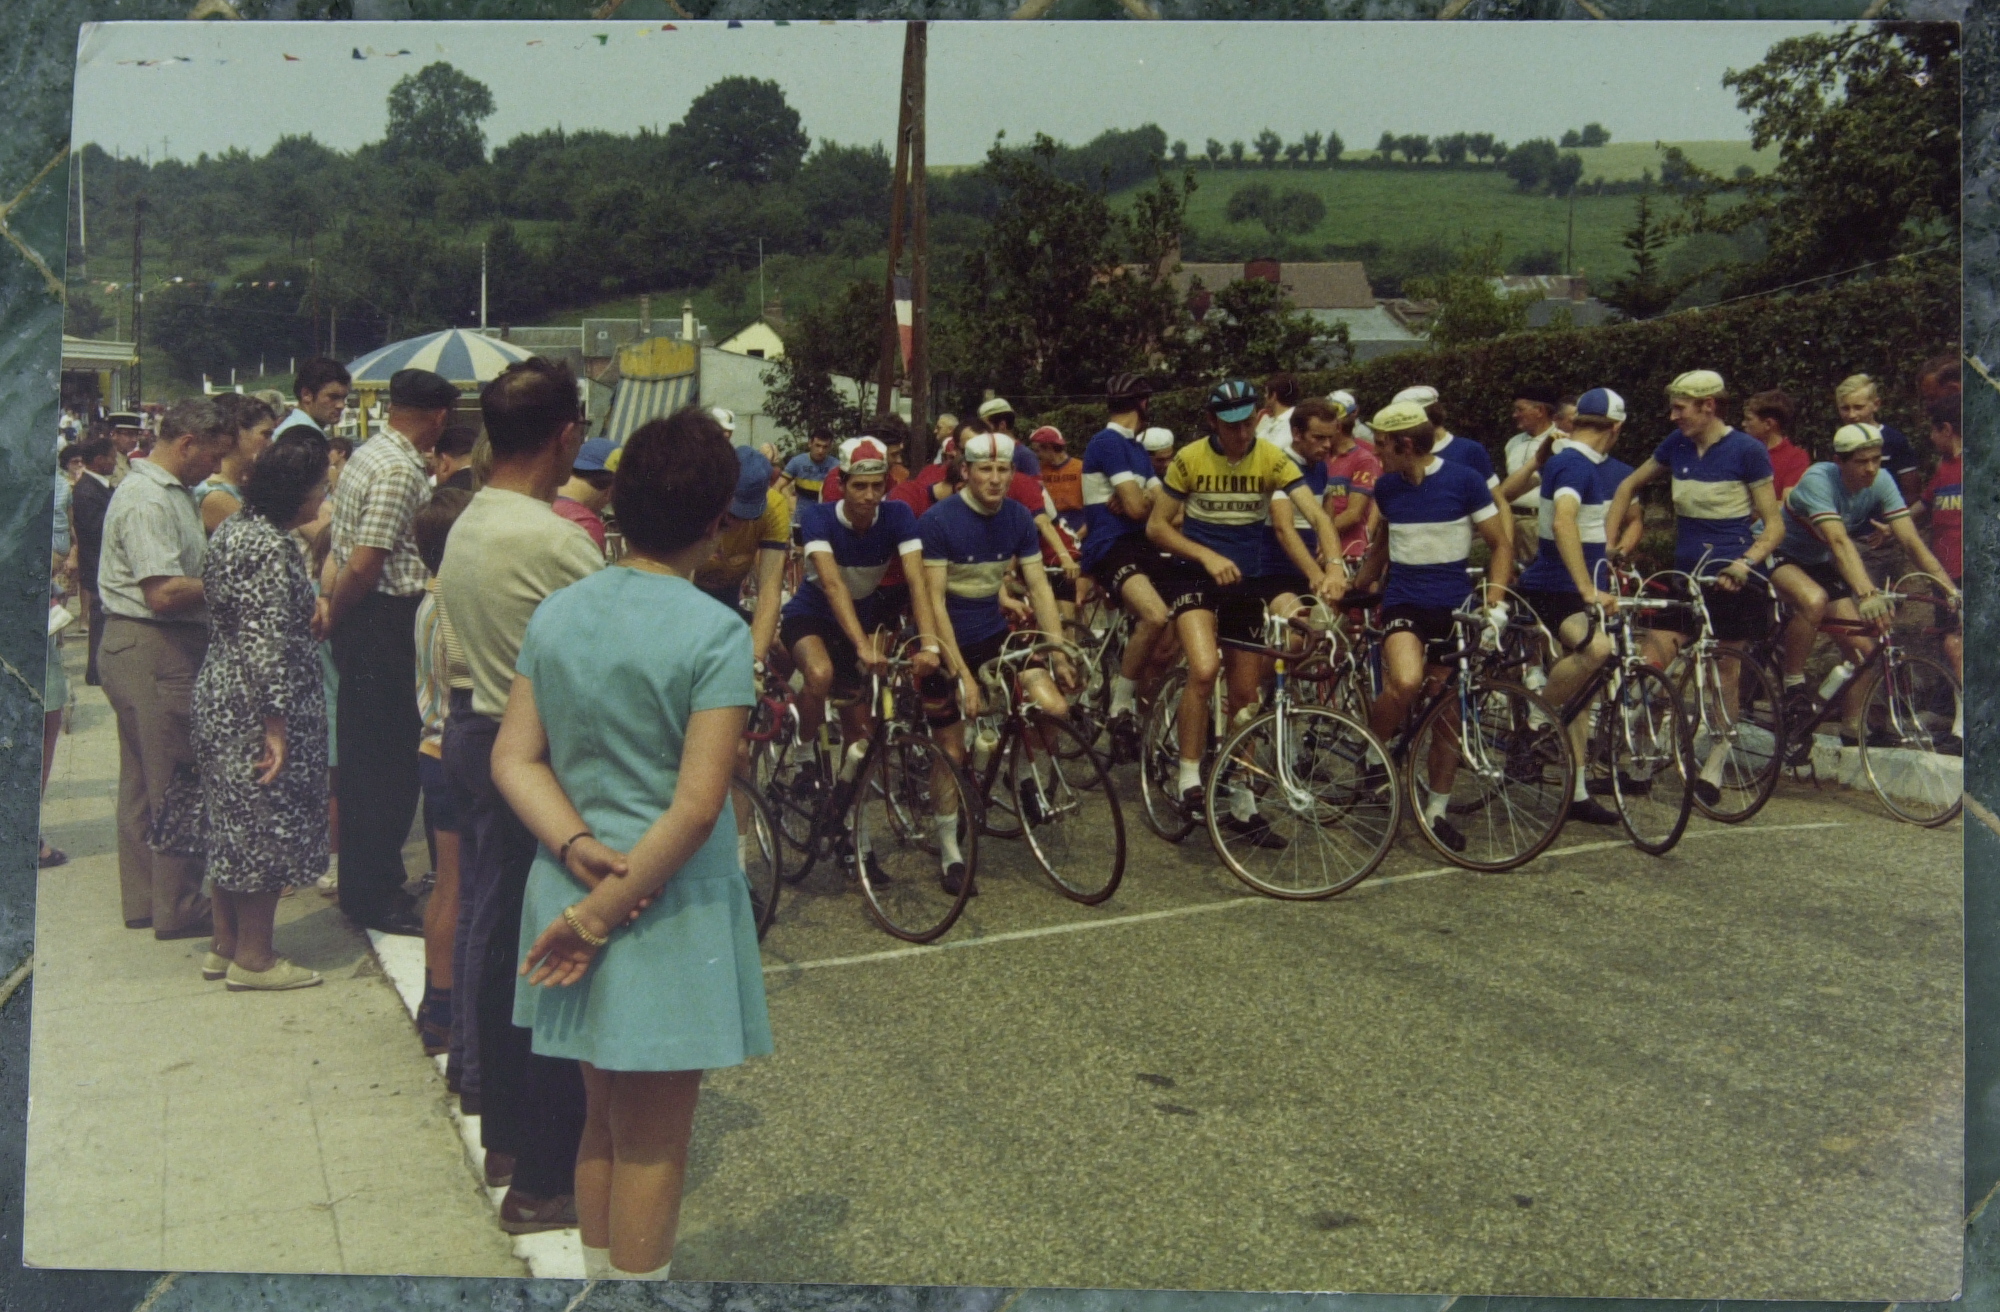 N. France some small town, 1970.  I cycled across northern France and happened on two farming communities holding a joint festival which included a bike race.